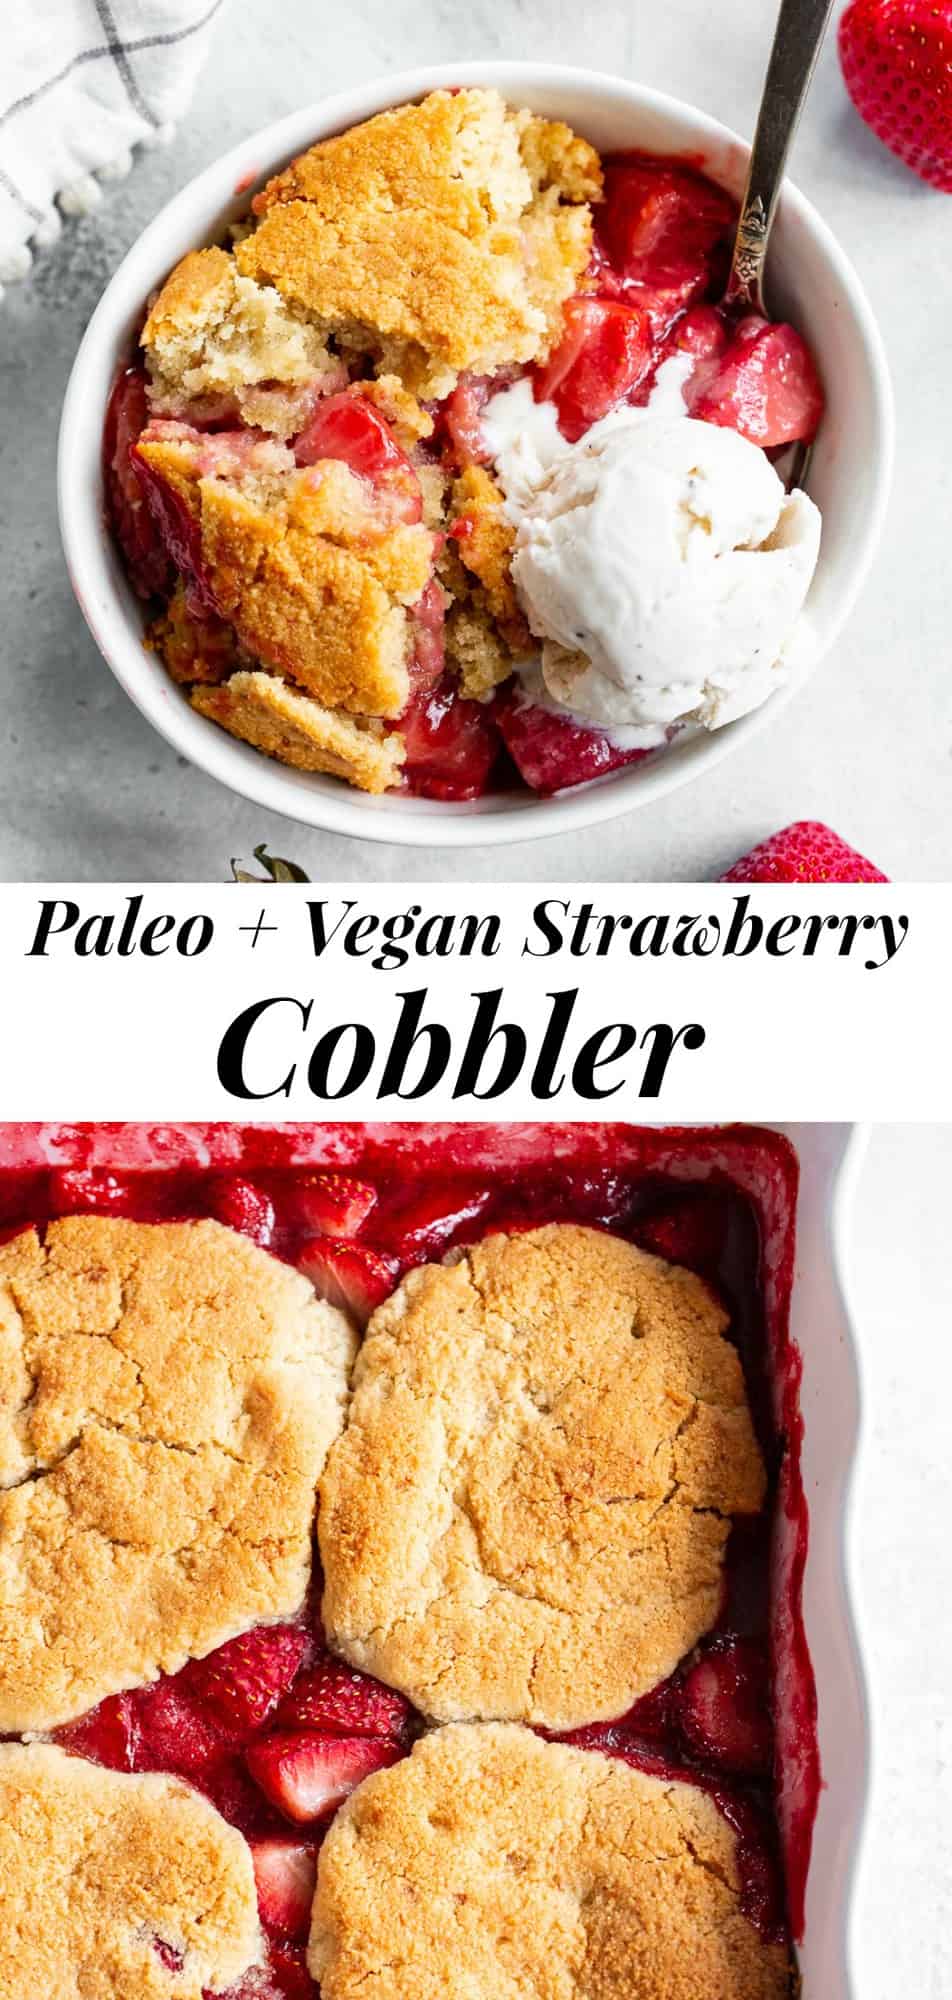 This paleo and vegan strawberry cobbler has quickly become a family favorite! A sweet strawberry layer is topped with a sweet biscuit cobbler topping that’s gluten free, dairy free, and egg free. It’s perfect served with a big scoop of coconut vanilla ice cream or on its own! Easy to make and the perfect healthy dessert for Spring and Summer. #vegan #paleo #glutenfree